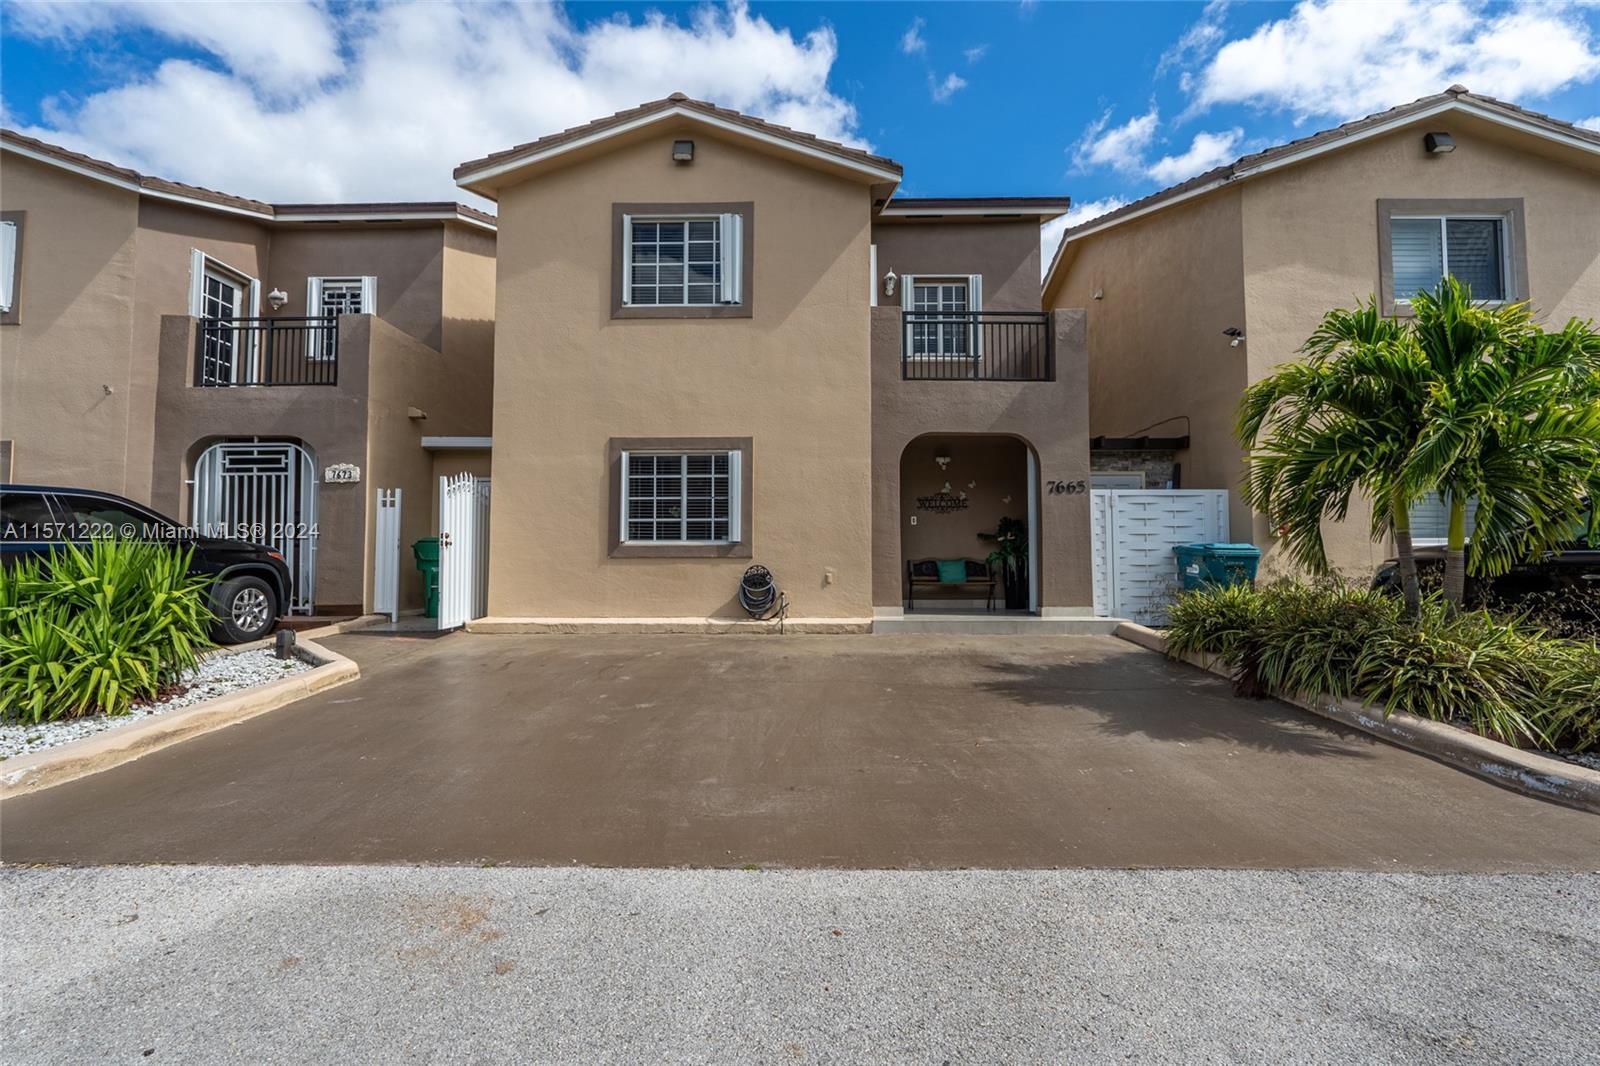 Stunning two-story townhome in Hialeah offers a perfect blend of modern updates and convenience. The